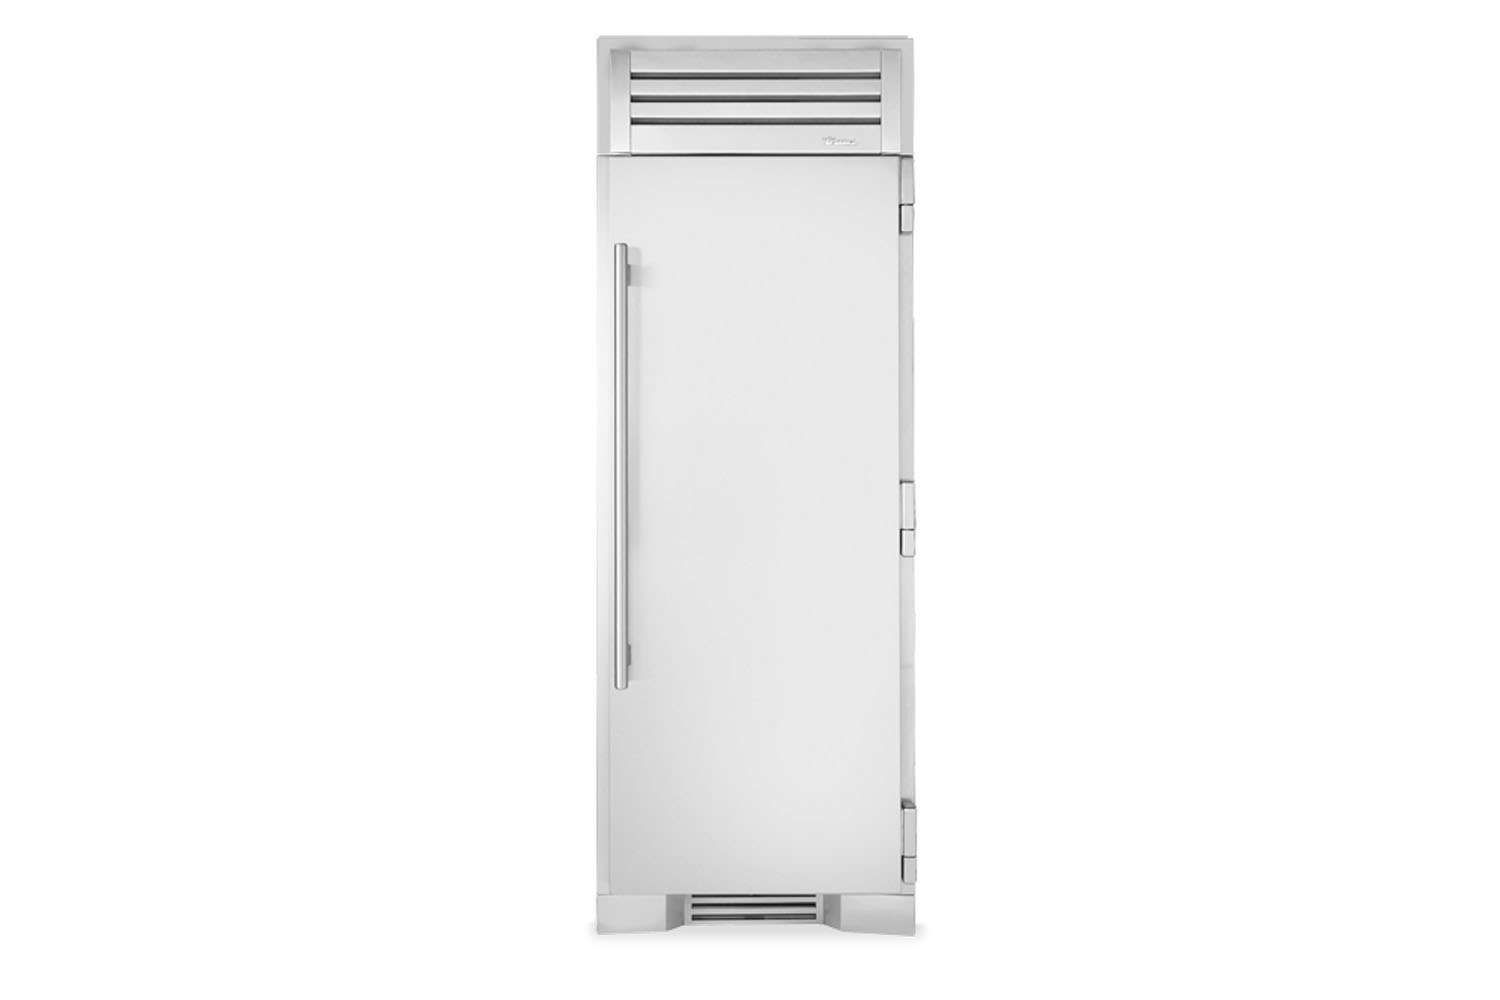 Customizable Commercial-Style Refrigerators from True Residential - Remodelista